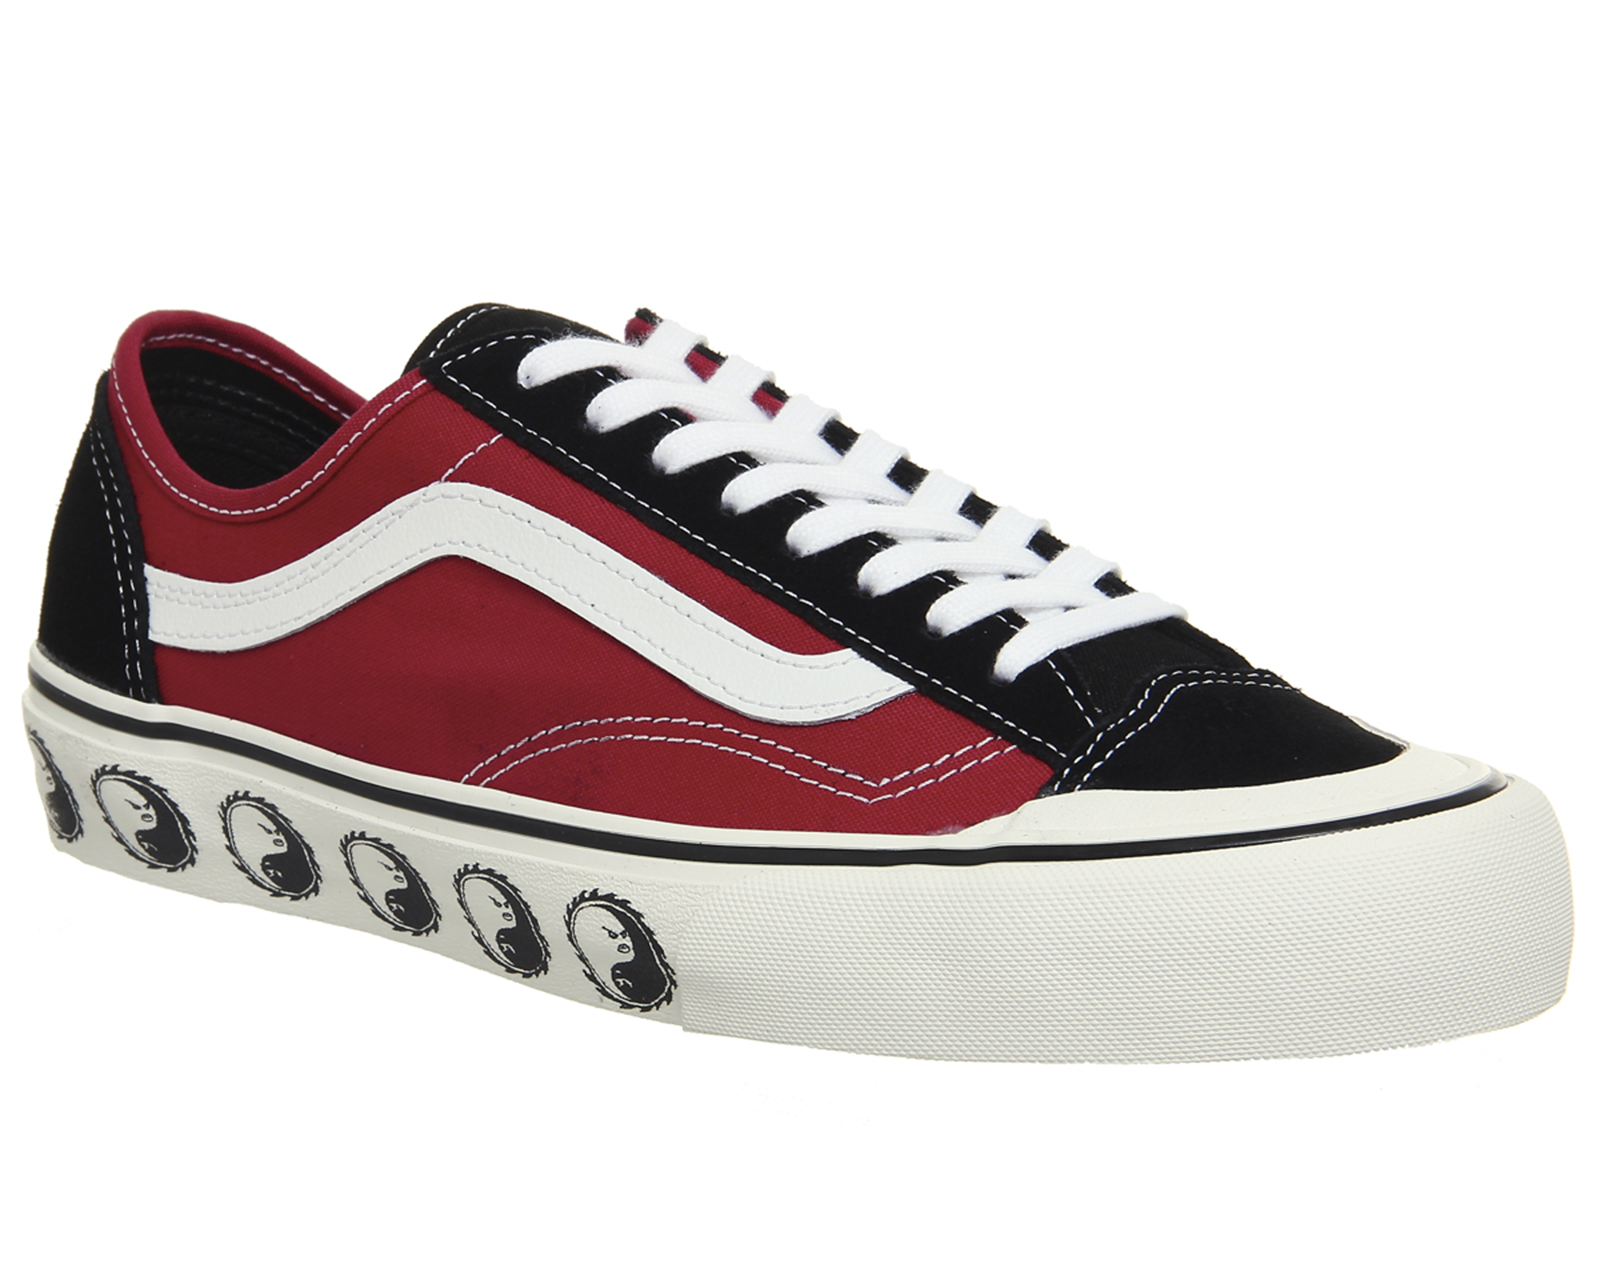 Vans Style 36 Decon Sf Black Red - His 